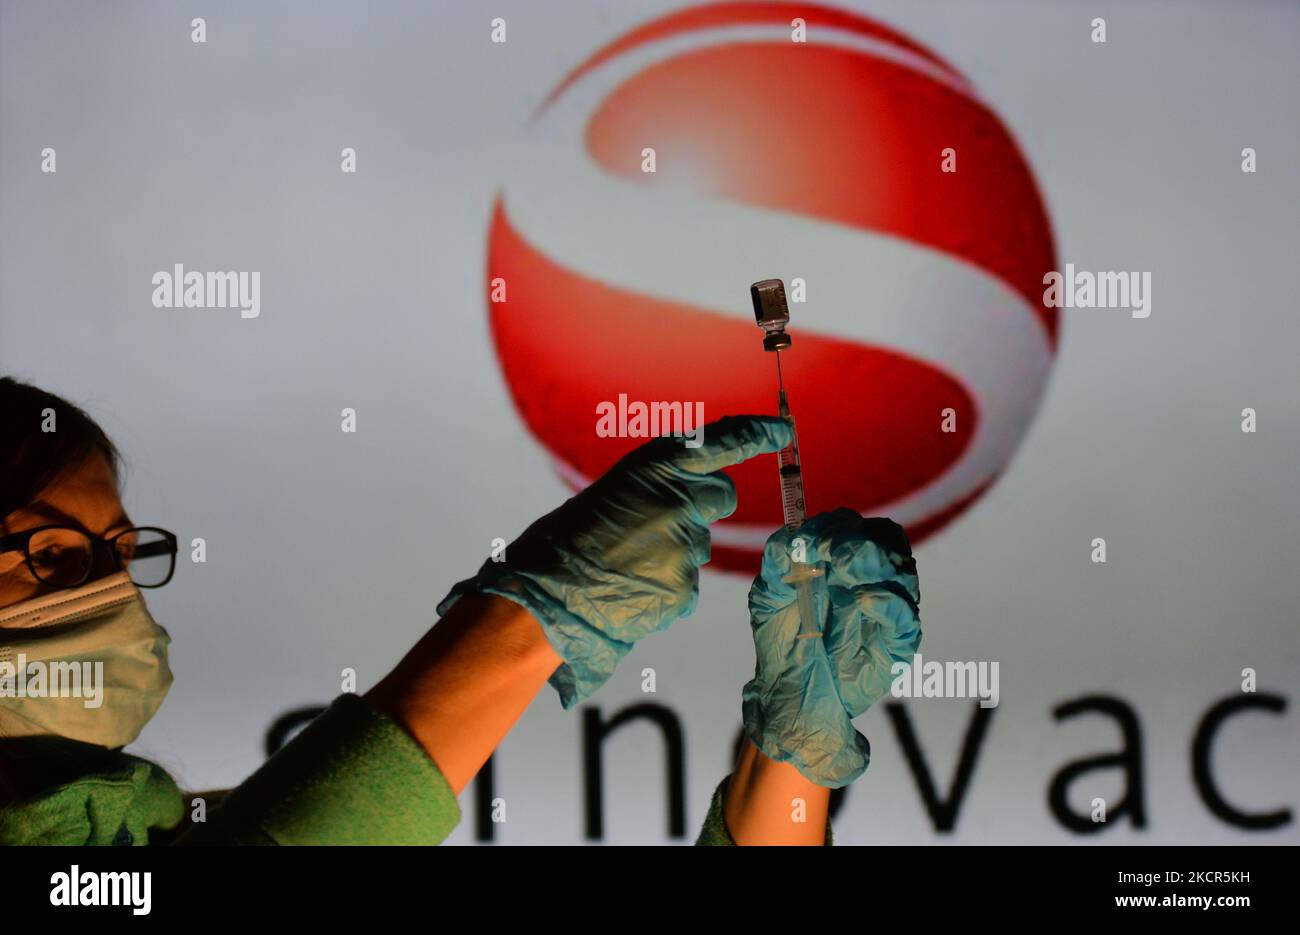 An illustrative image of a person holding a medical syringe and a vaccine vial in front of the Sinavac logo displayed on a screen. On Thursday, October 21, 2021, in Edmonton, Alberta, Canada. (Photo by Artur Widak/NurPhoto) Stock Photo